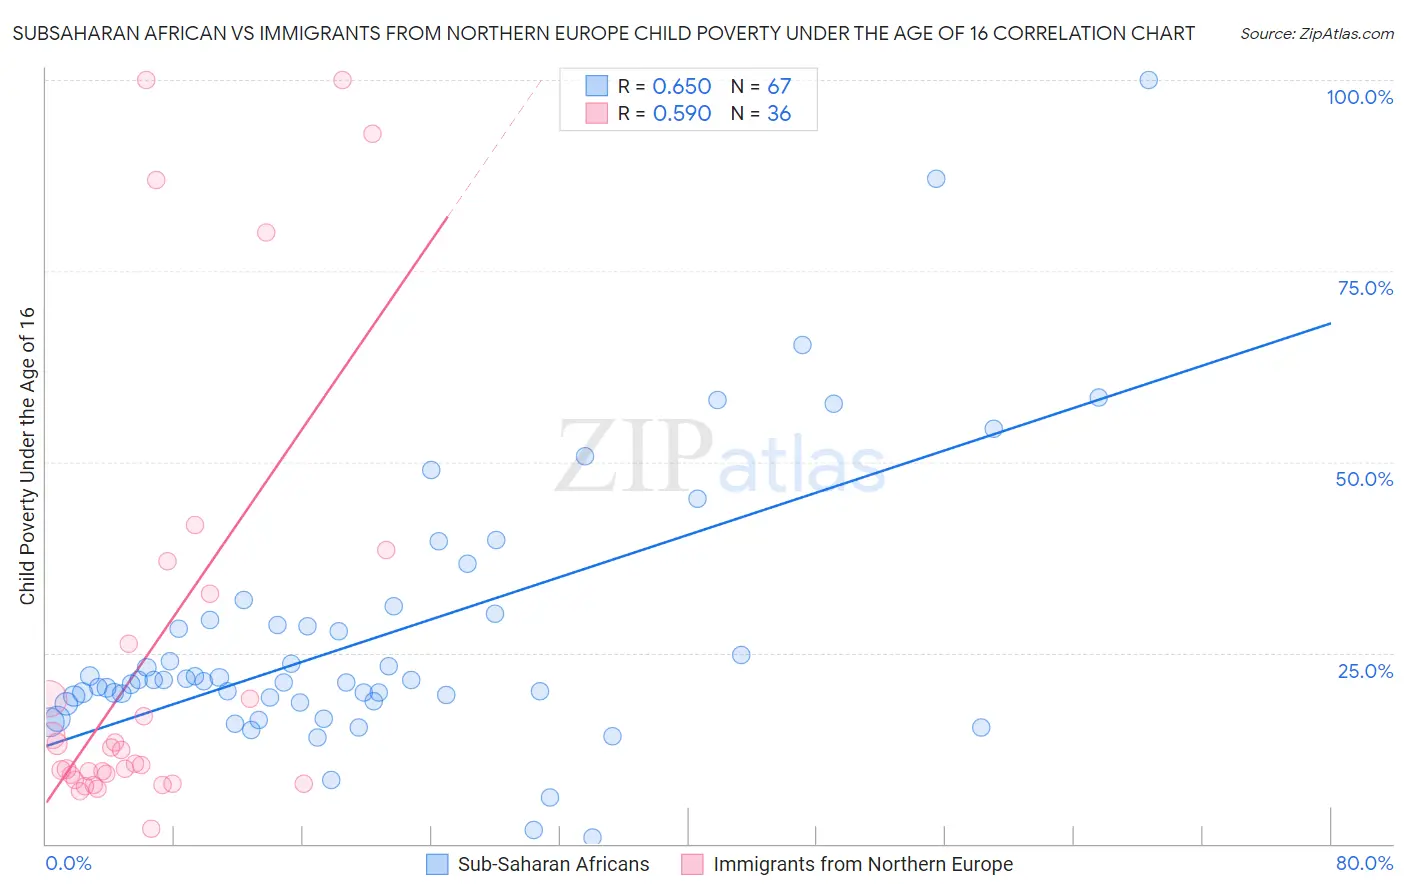 Subsaharan African vs Immigrants from Northern Europe Child Poverty Under the Age of 16